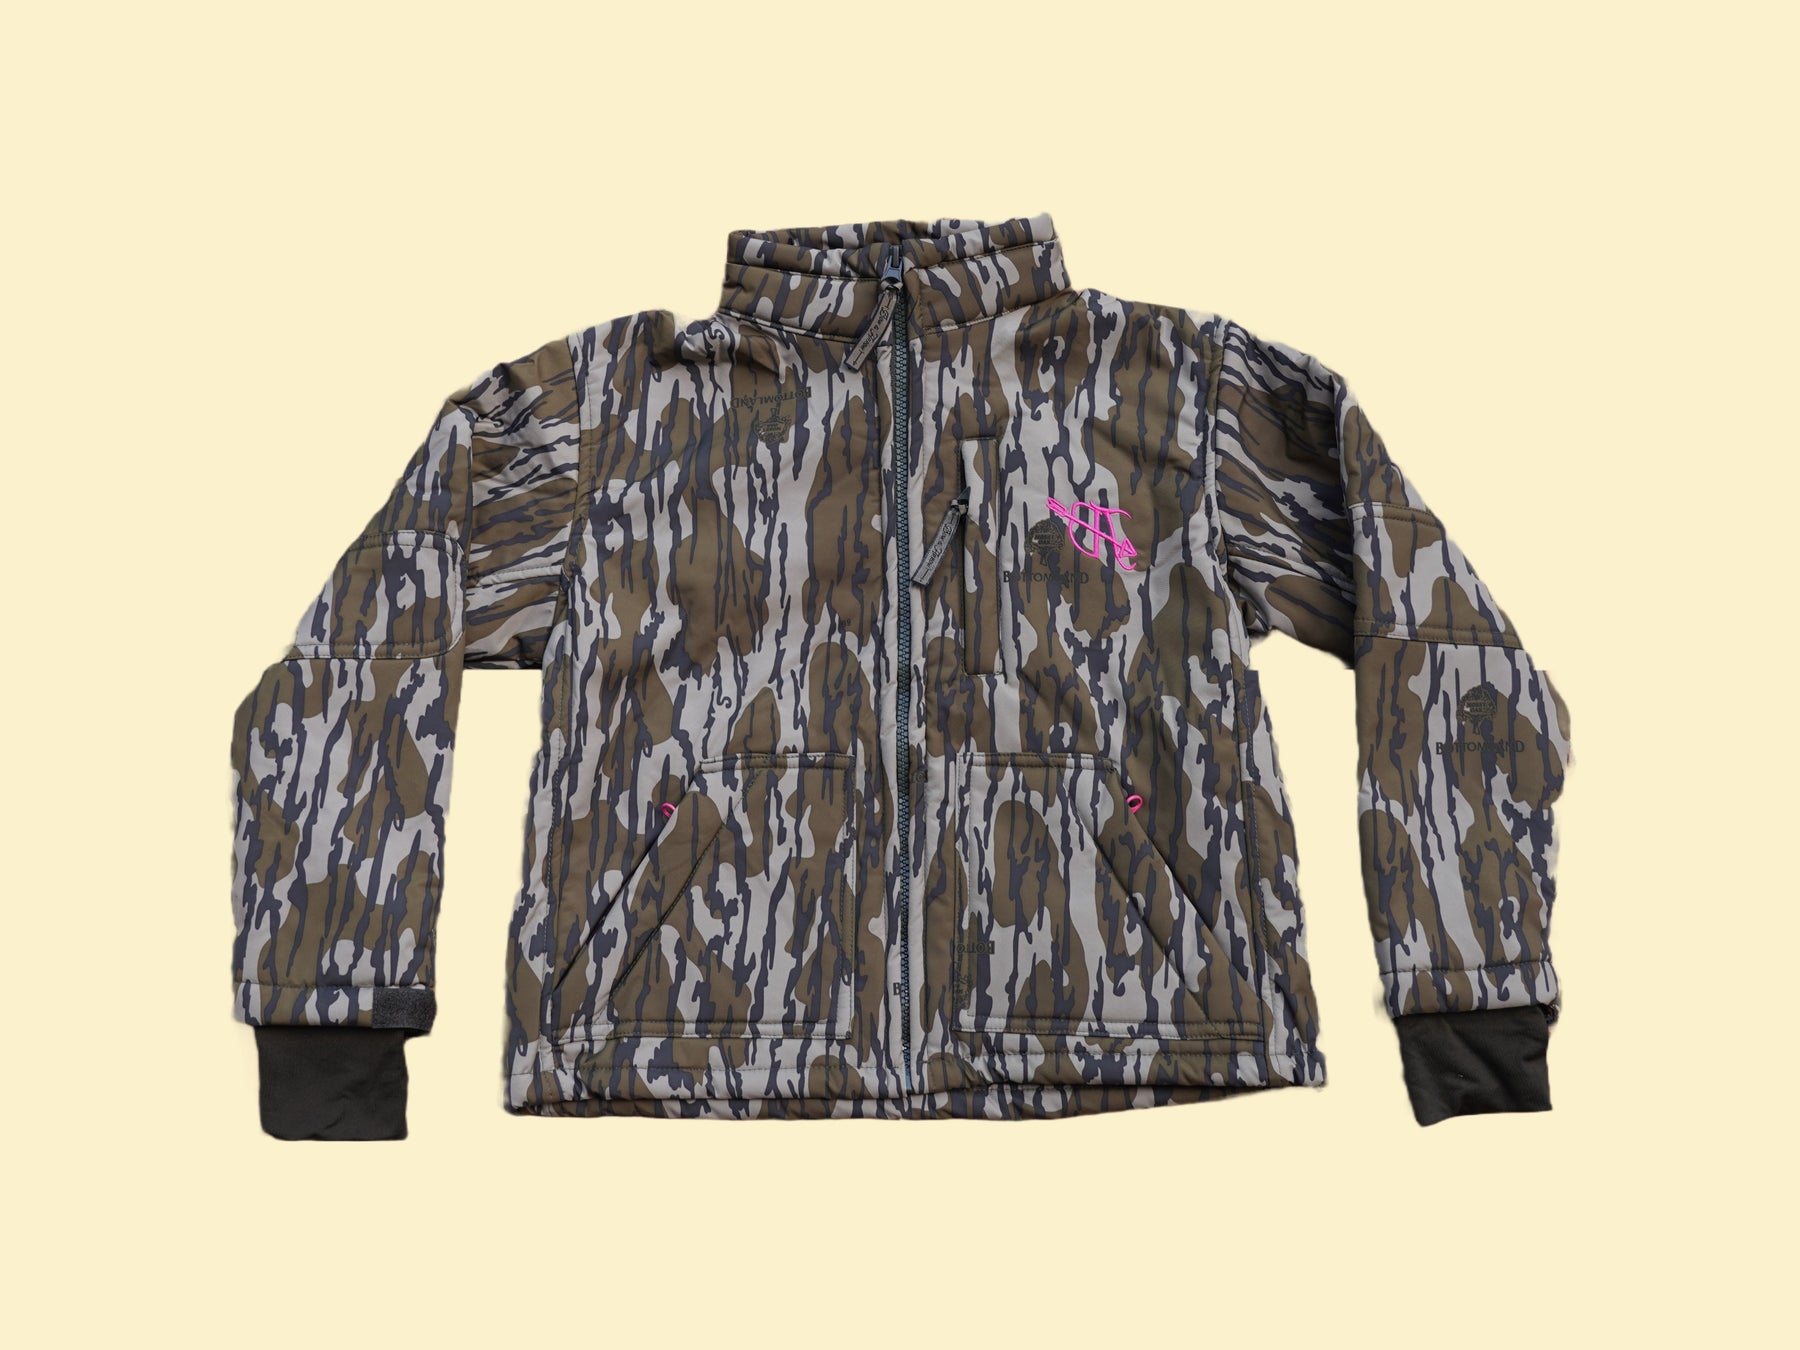 Medium Weight Hunting Jacket by Bow and Arrow Outdoors - Sportsman Gear